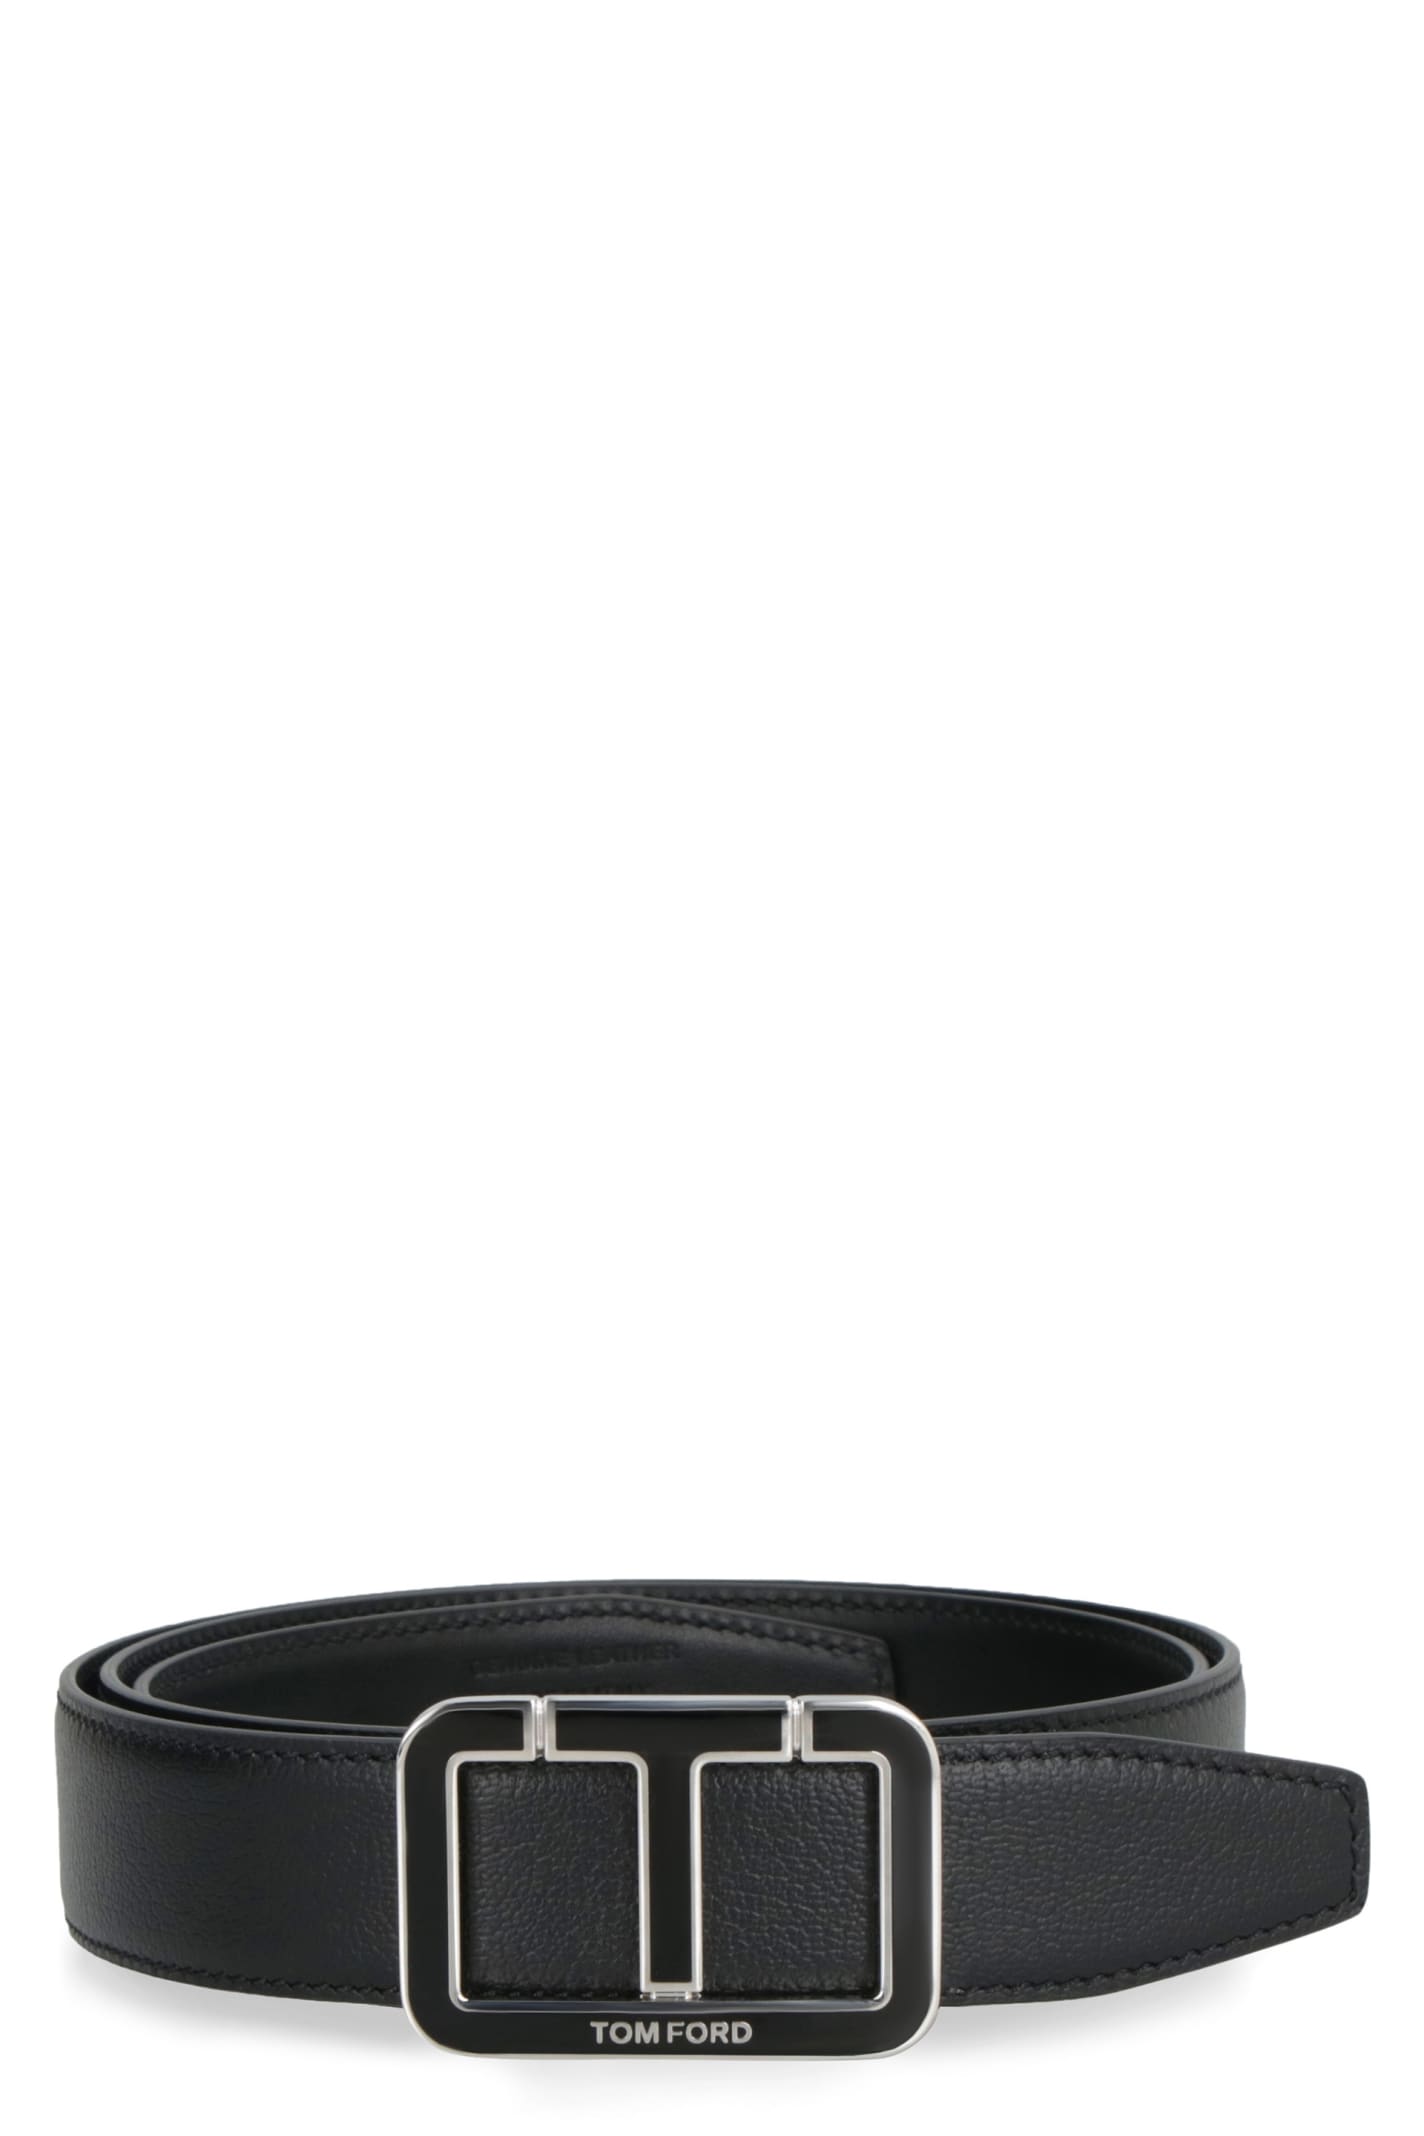 TOM FORD CALF LEATHER BELT WITH BUCKLE